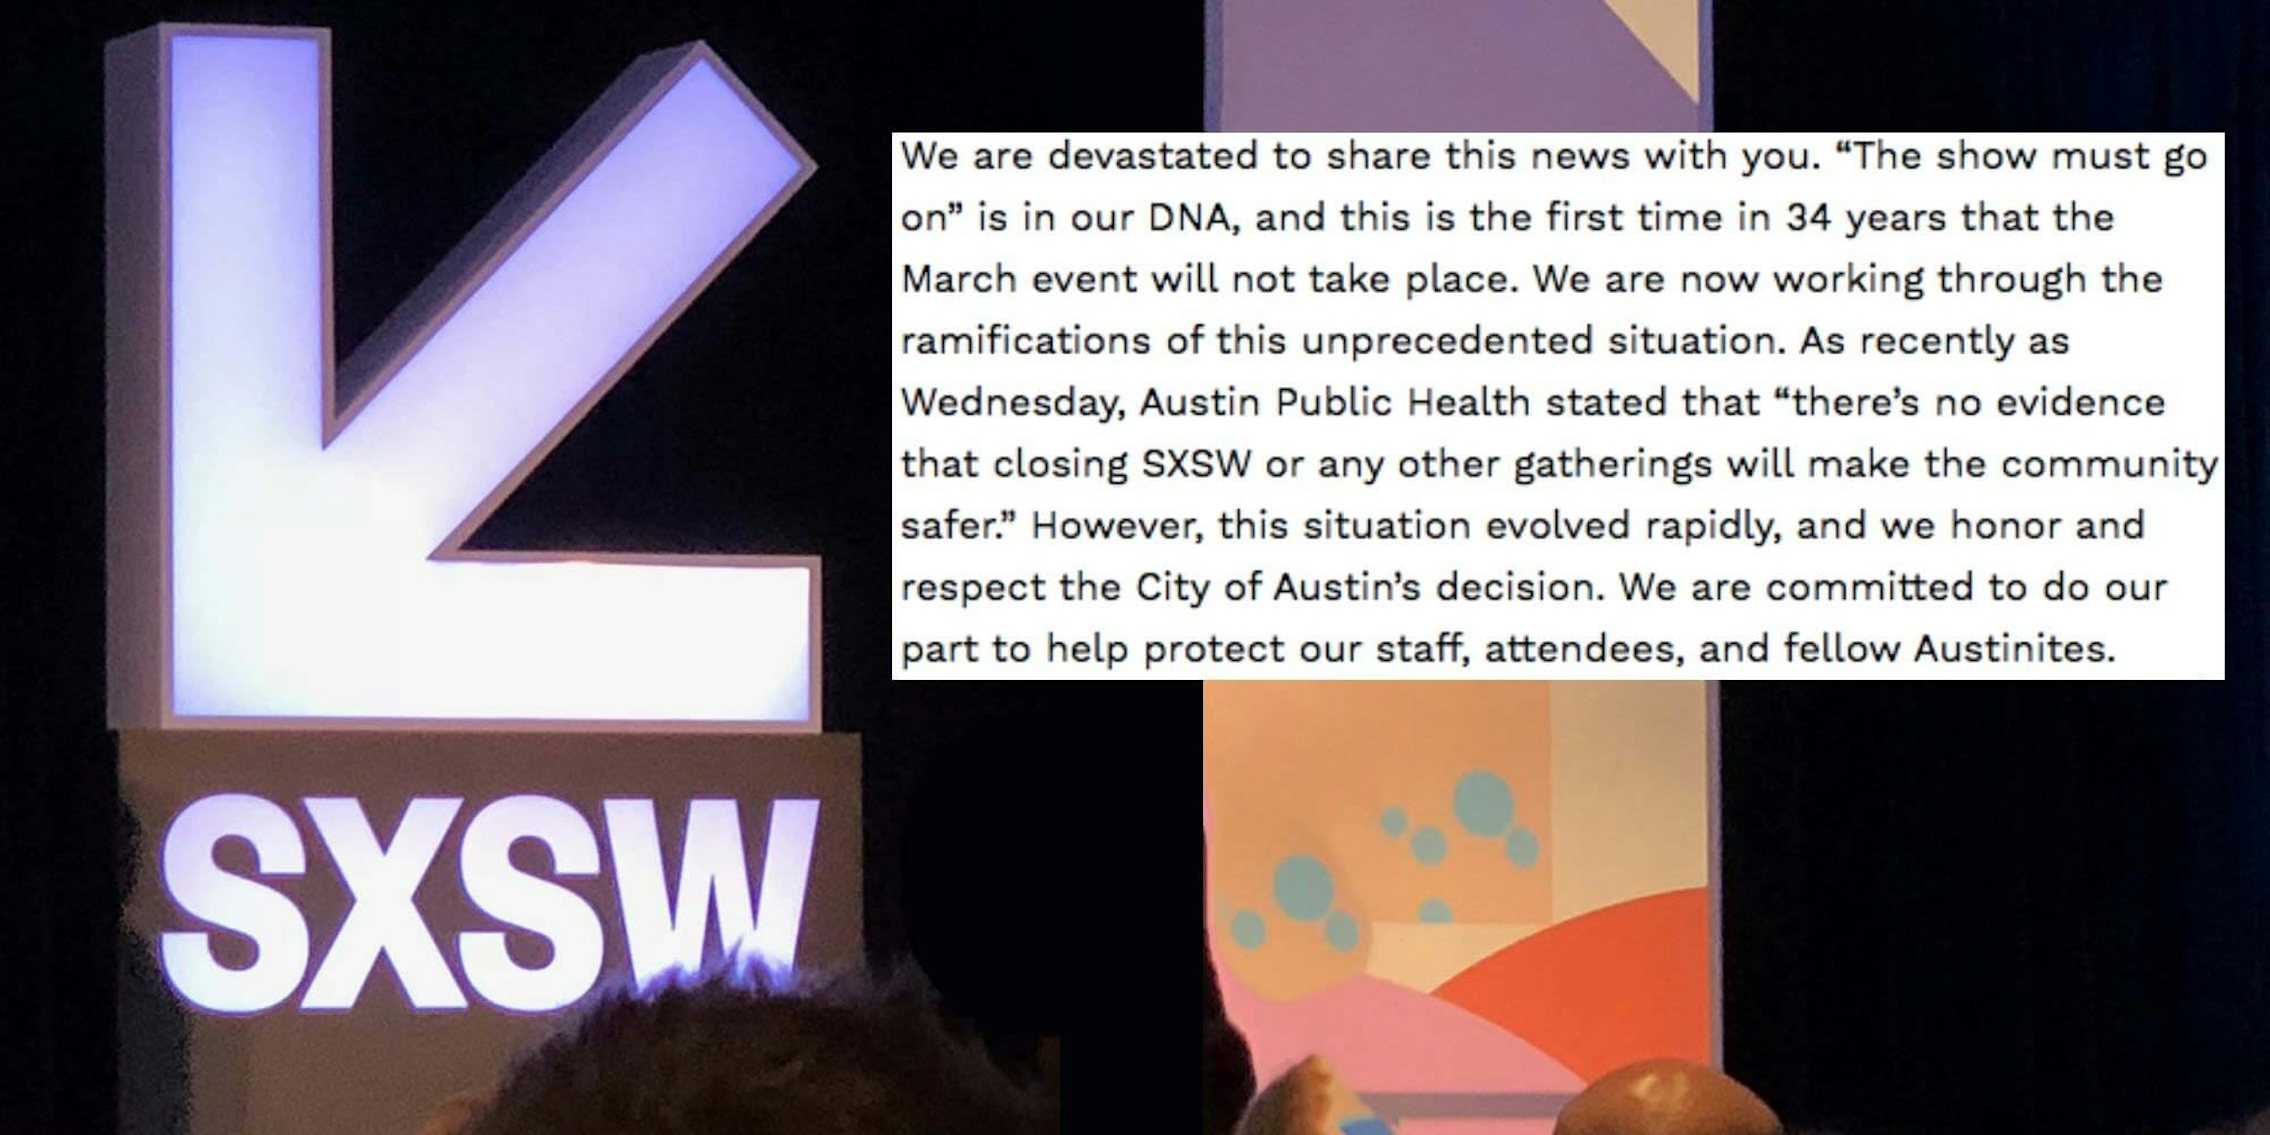 Statement from SXSW on 2020 cancellation